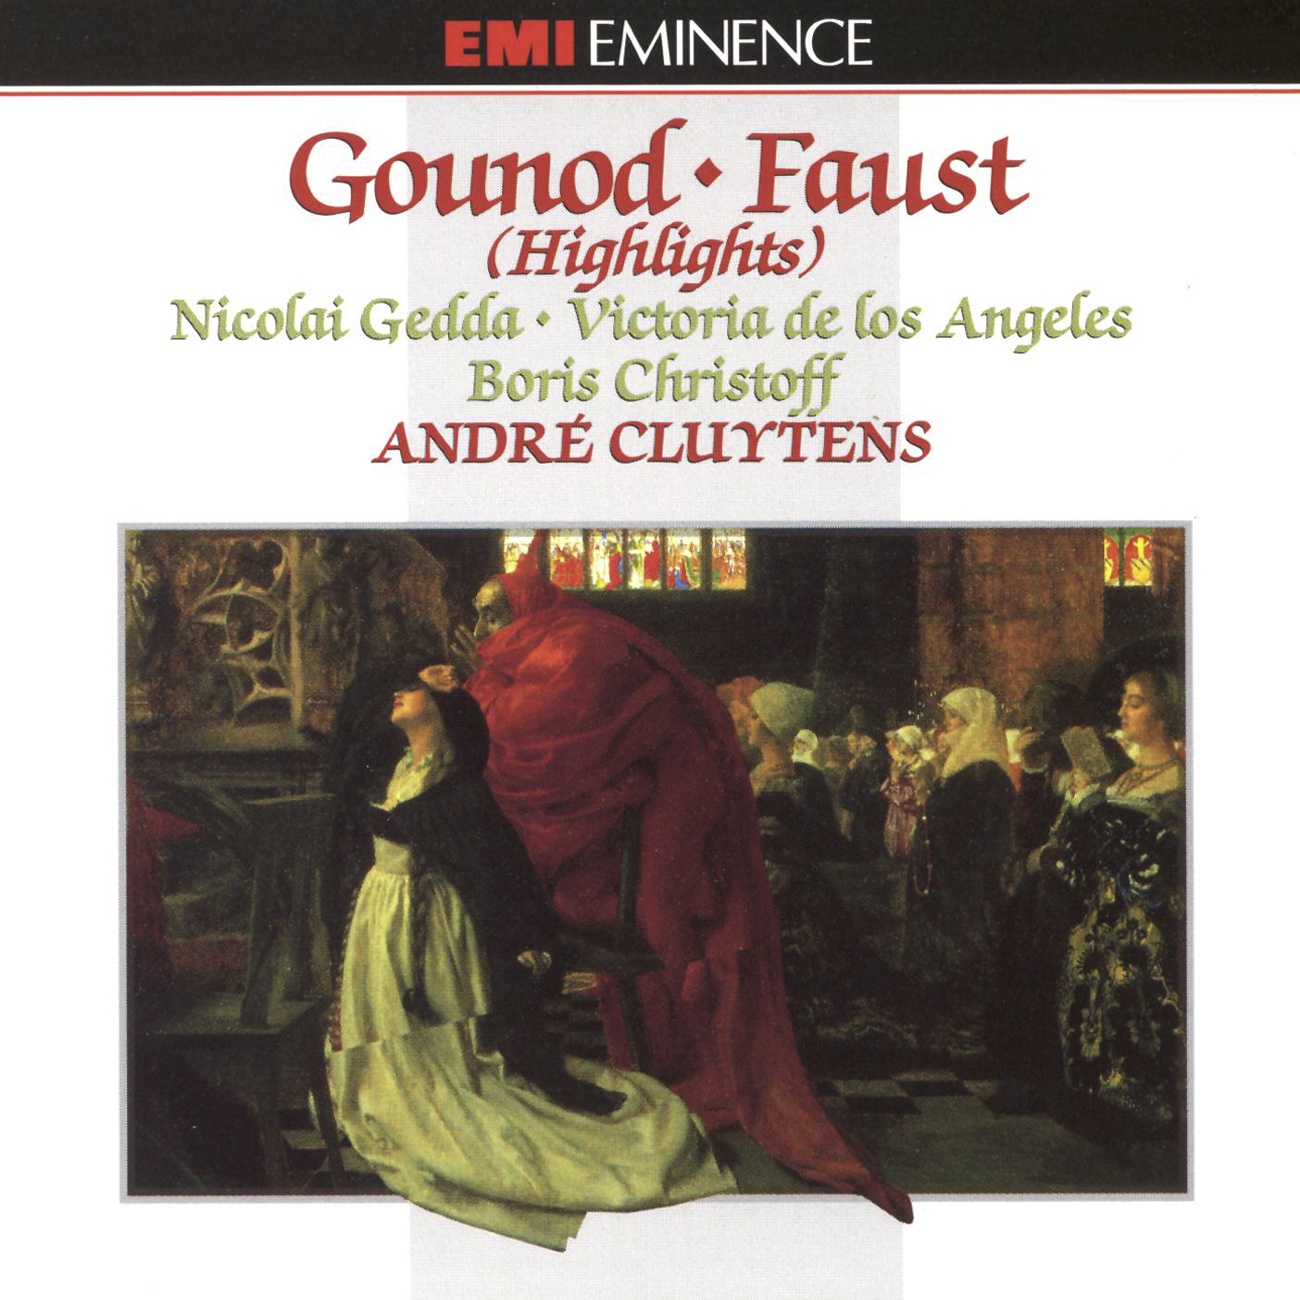 Faust (Highlights)